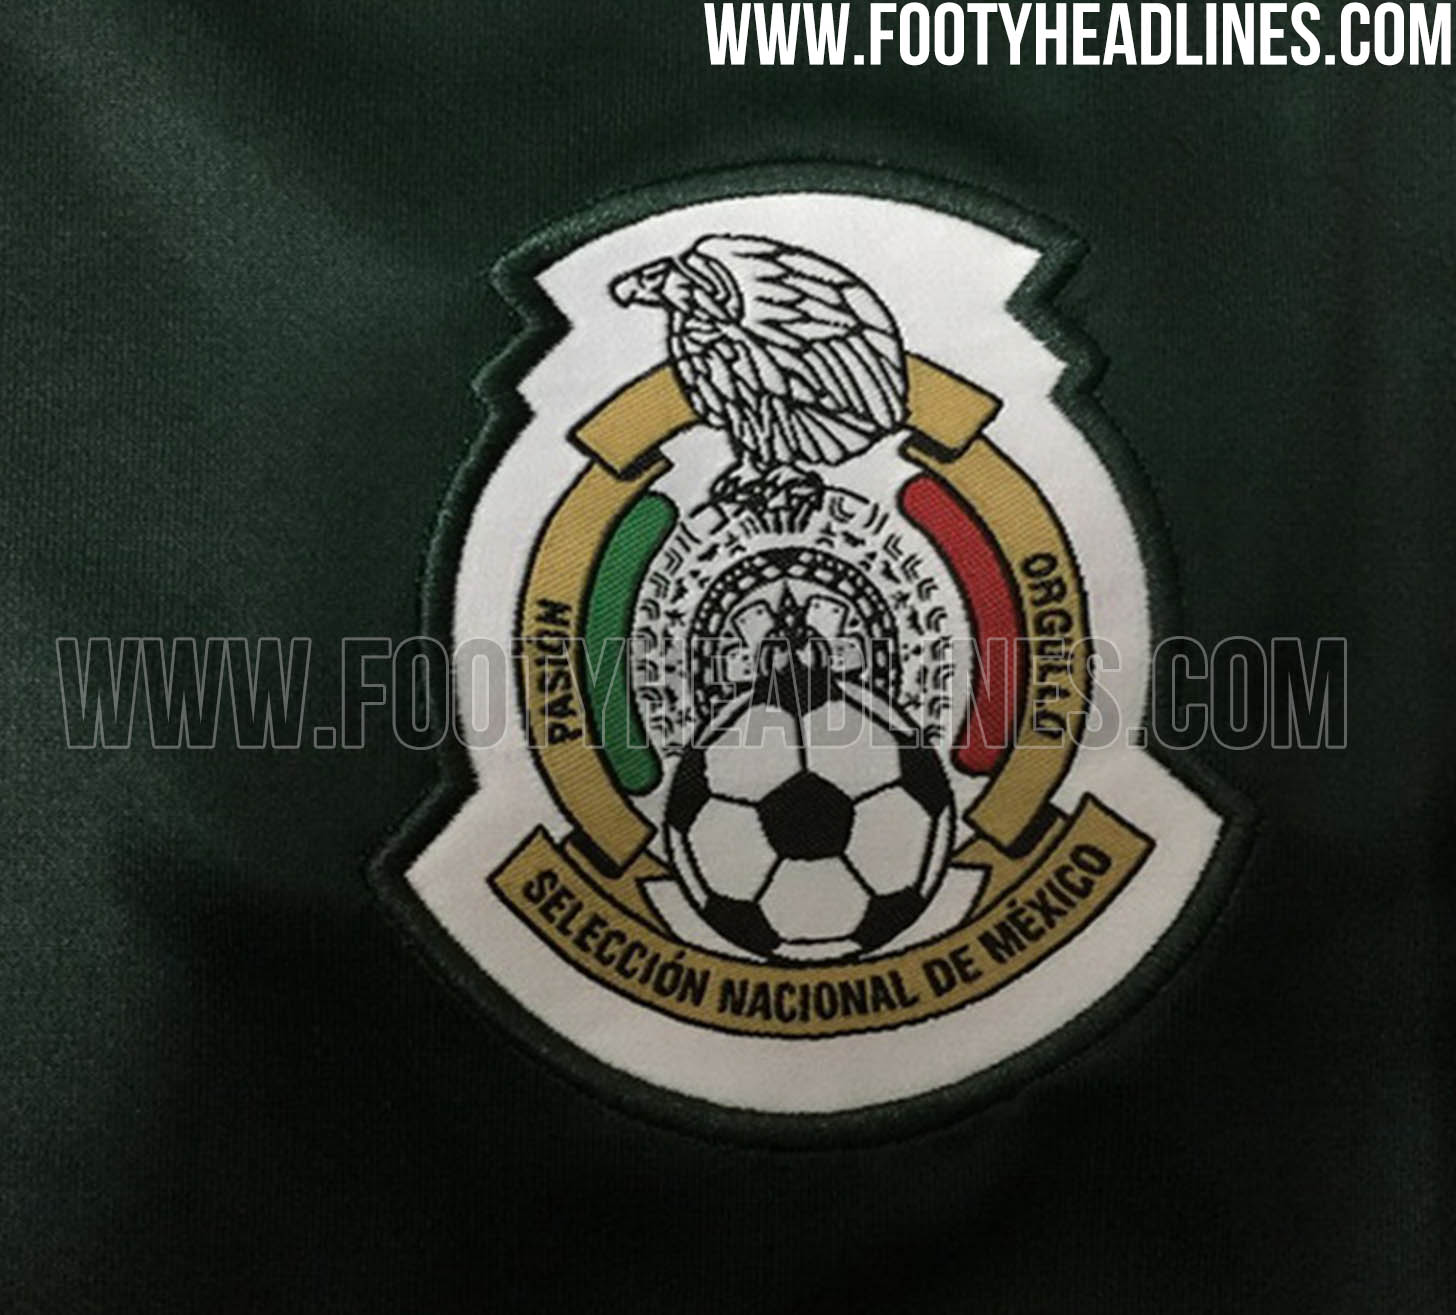 Similar to the previous Mexico home jersey, the new Mexico 2018 World ...